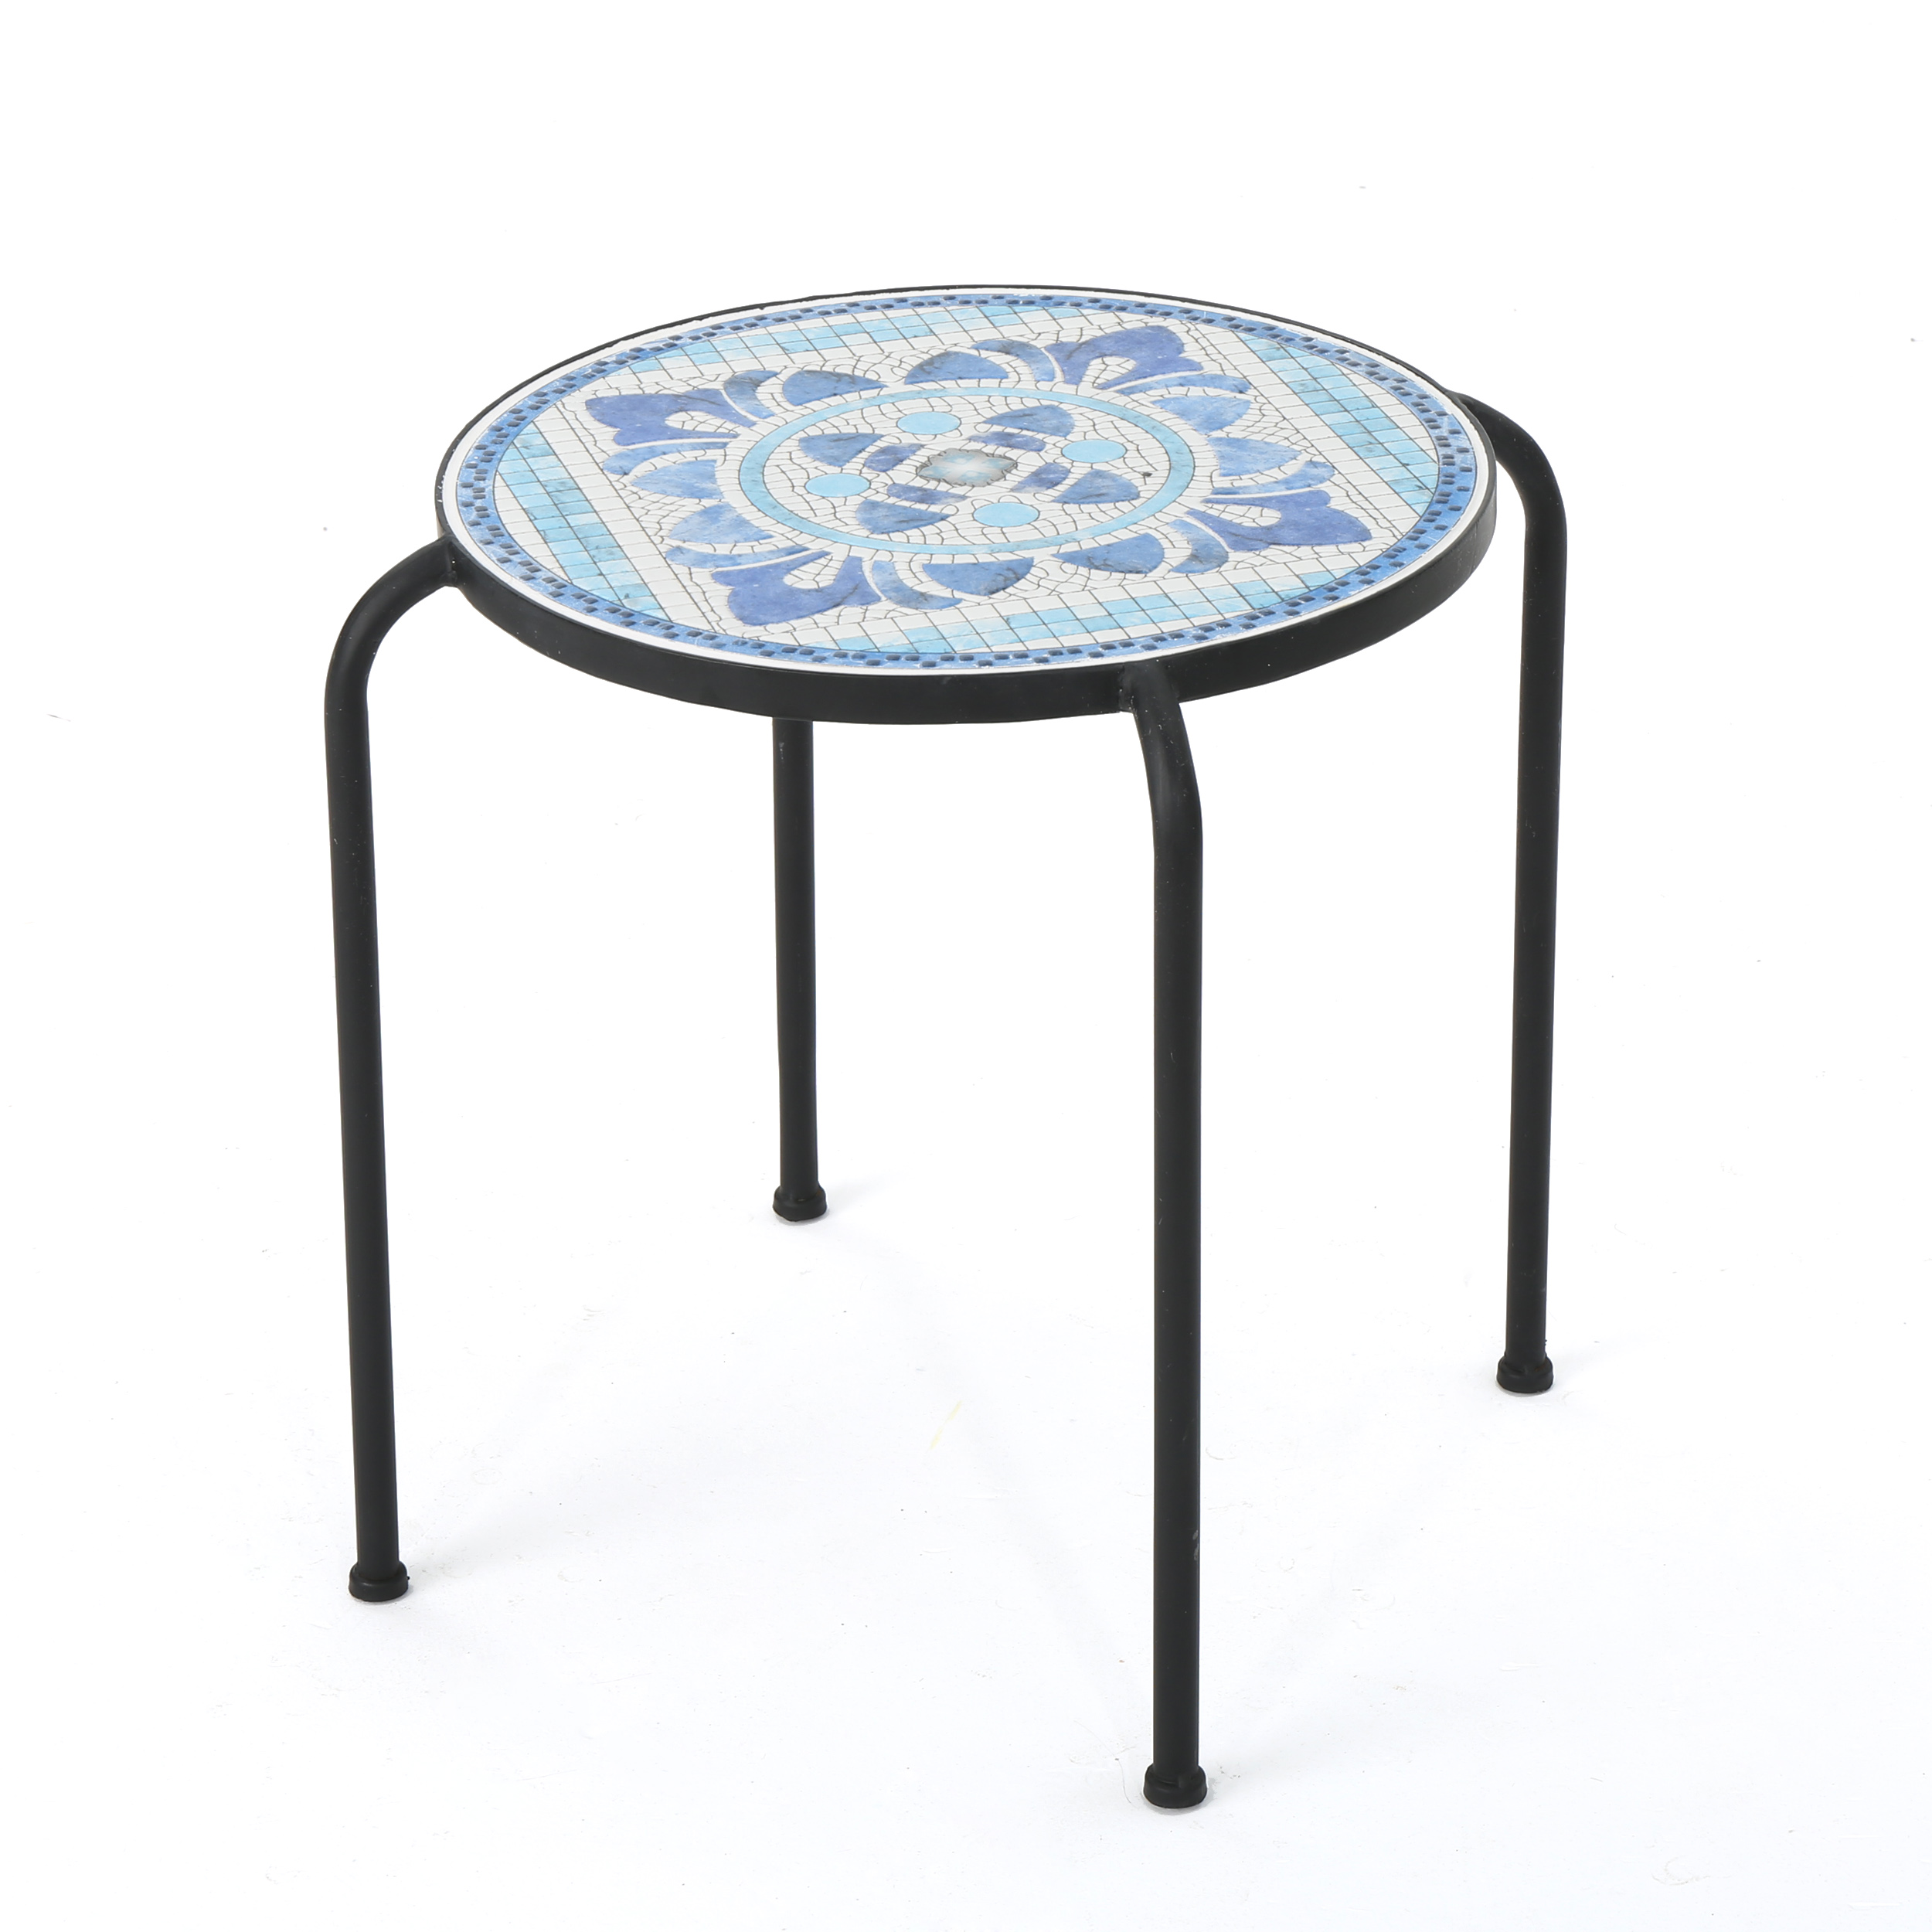 Sindarin Outdoor Ceramic Tile Round Side Table, Blue and White - image 1 of 5